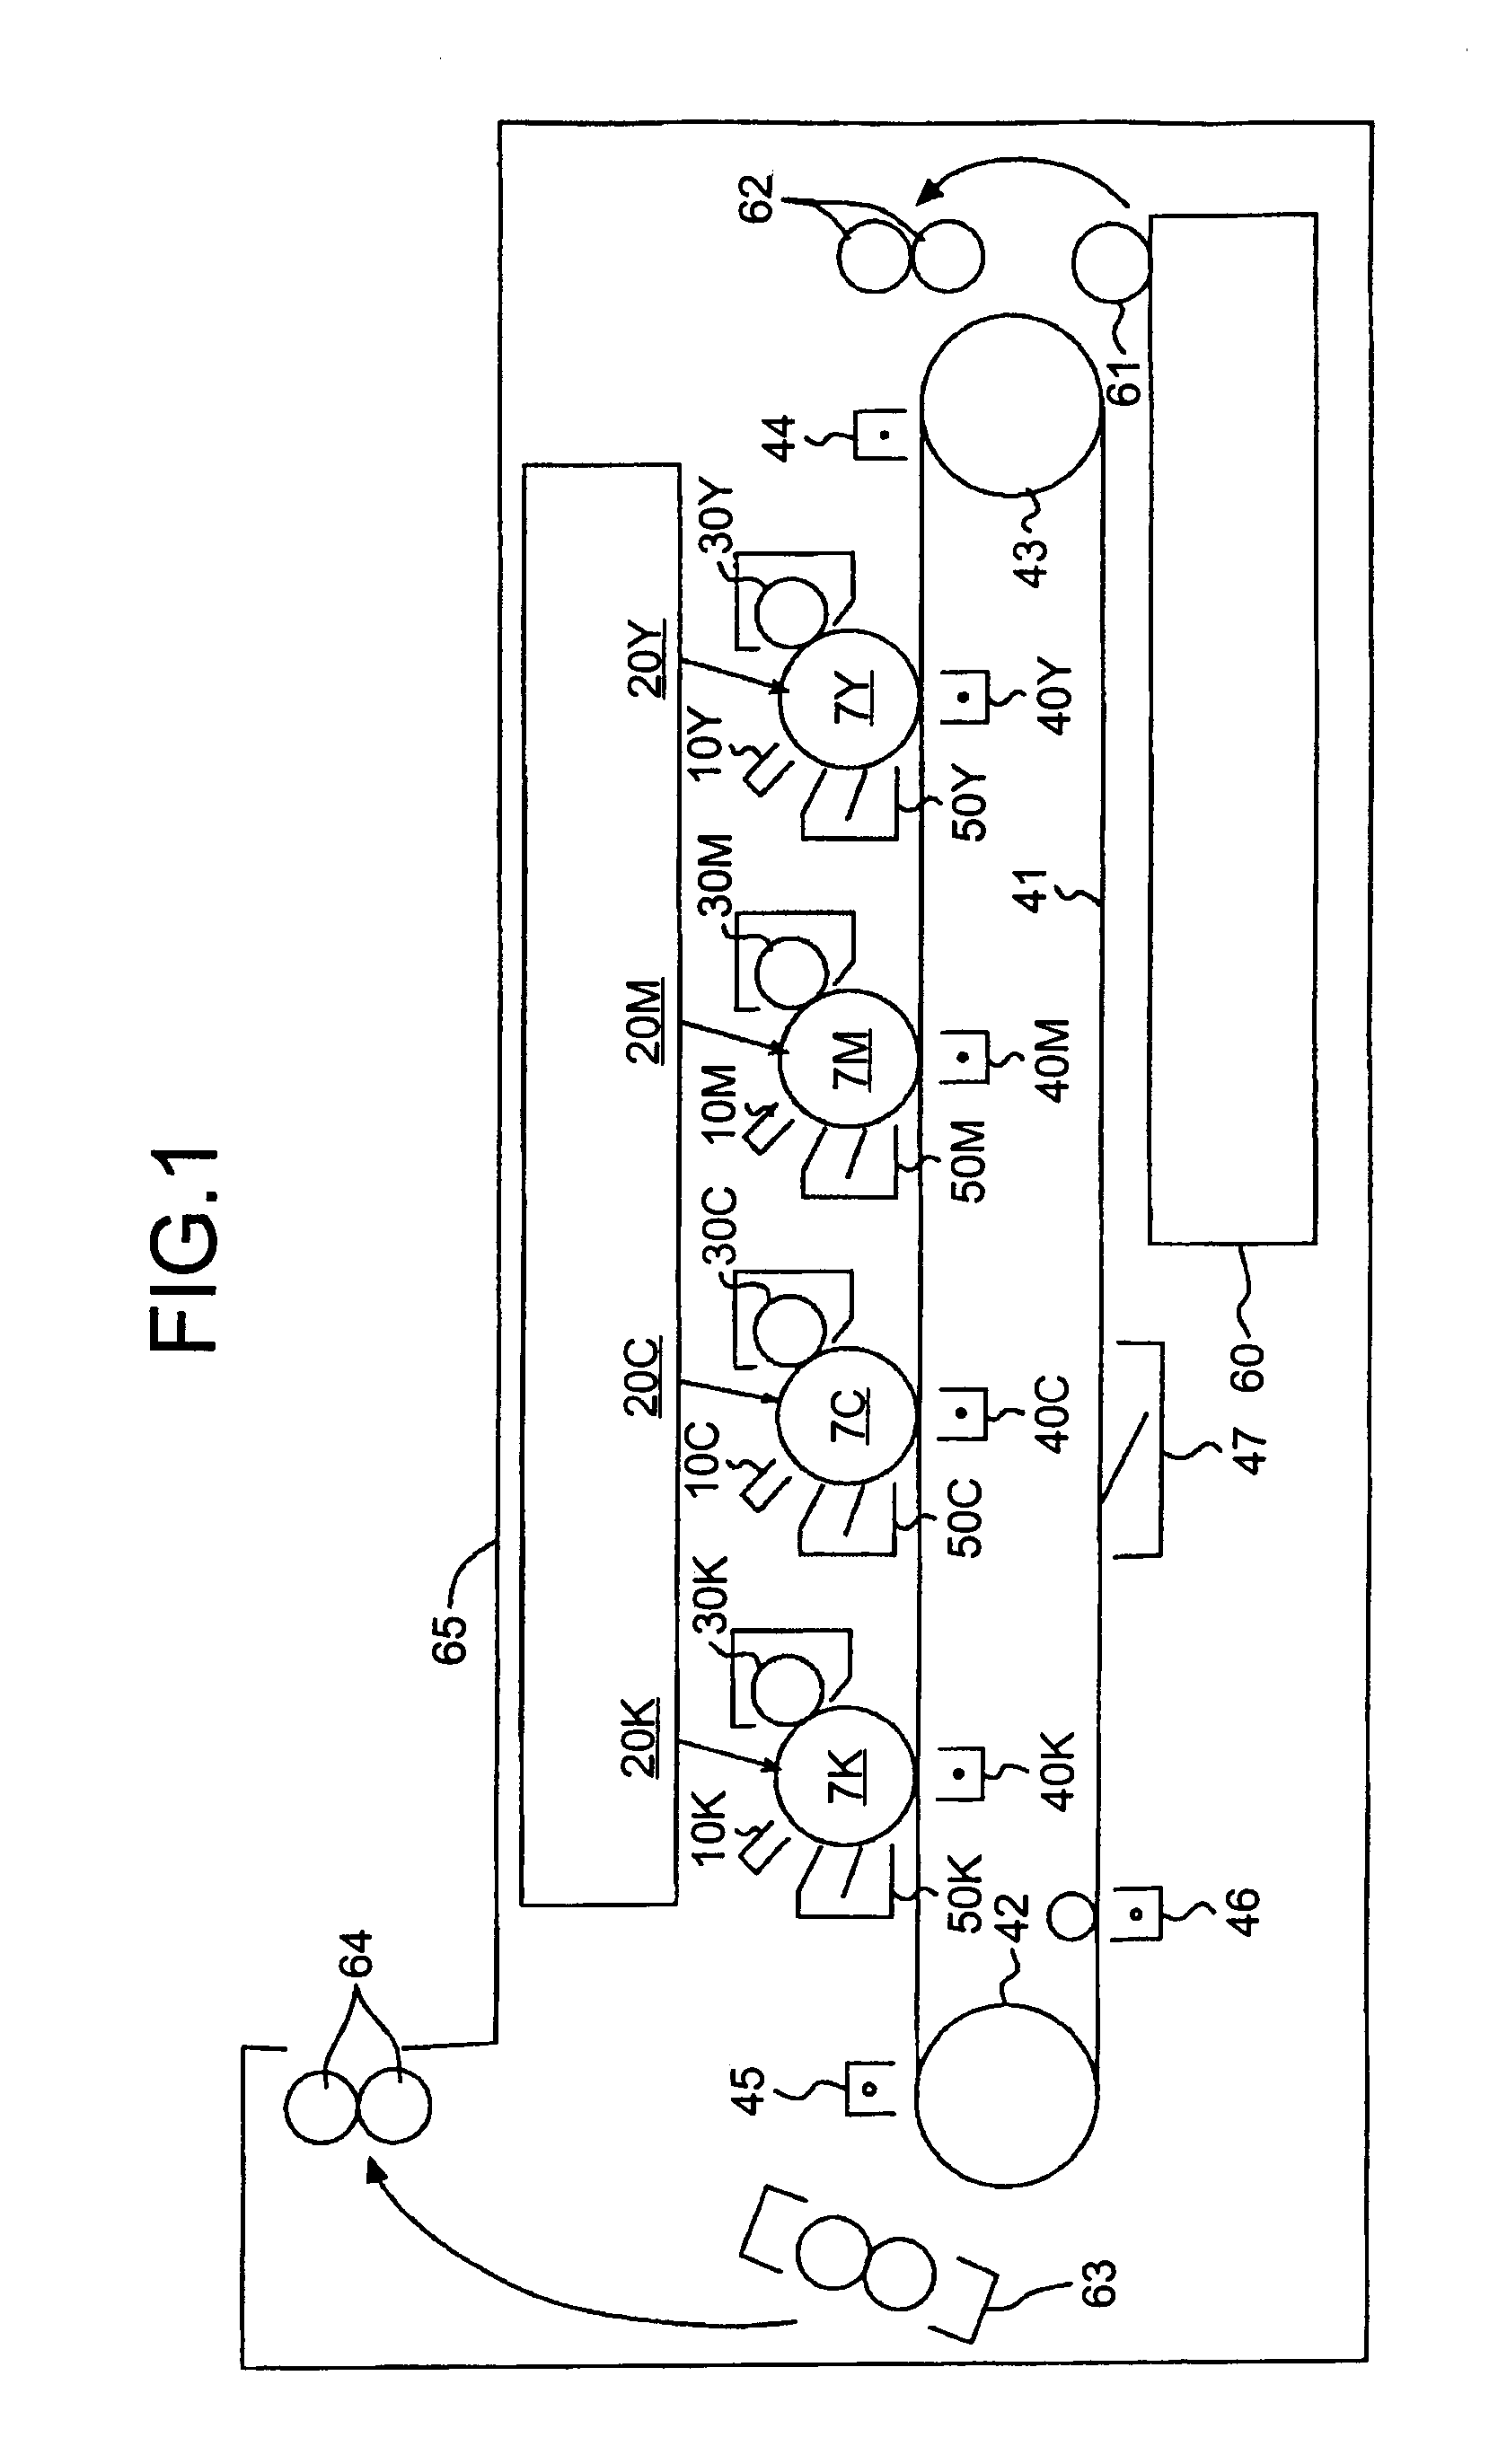 Optical scanning device, optical writing device, and image forming apparatus